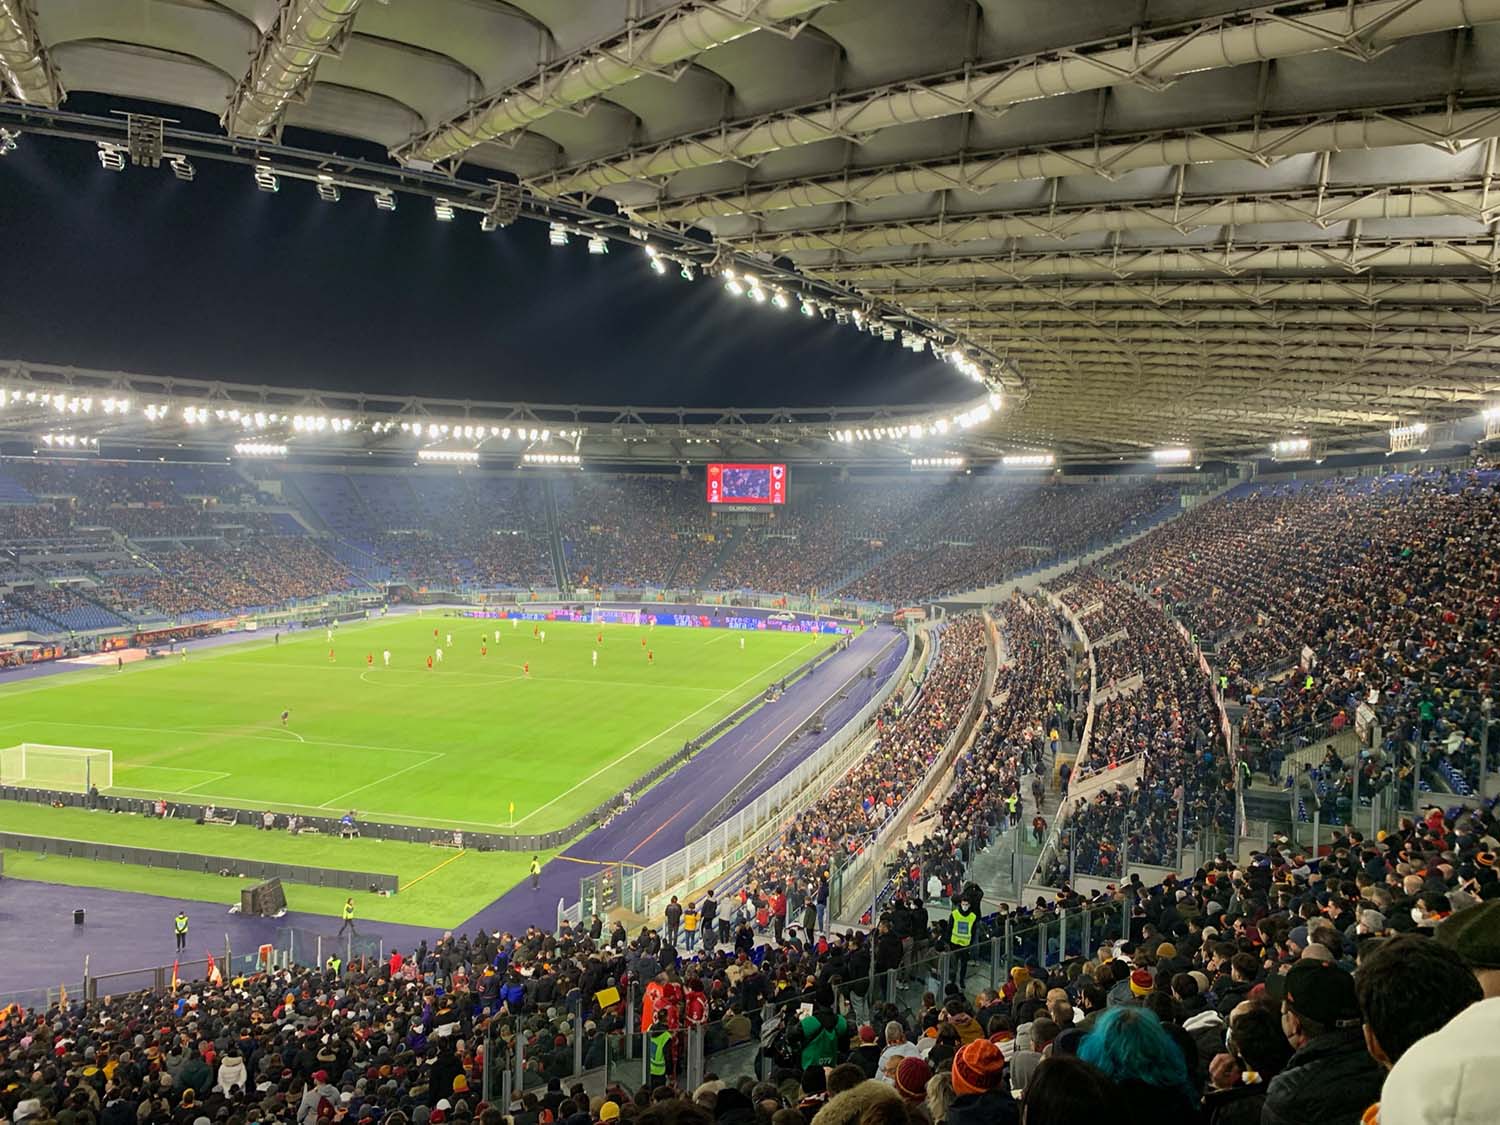 The Stadio Olimpico during a football match | Photo by Vincenzo Togni / Wikimedia Commons, License CC Attribution-Share Alike 4.0 International (CC BY-SA 4.0)